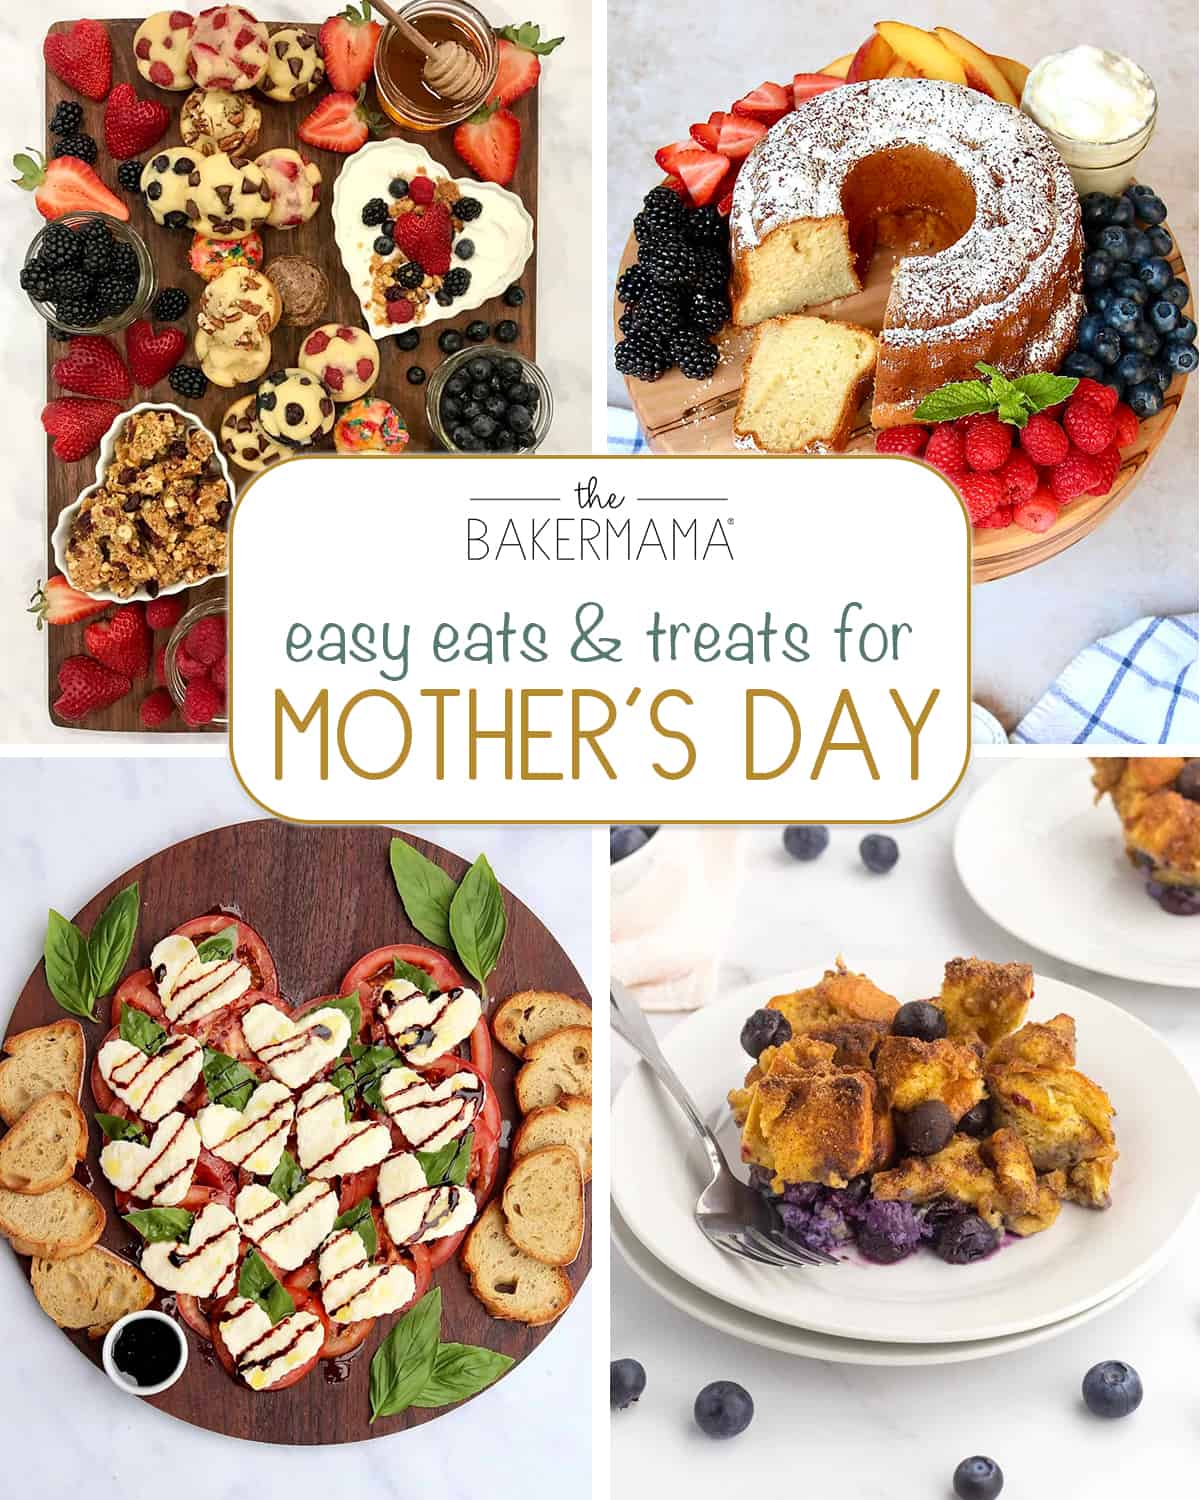 Easy Eats and Treats for Mother's Day by The BakerMama